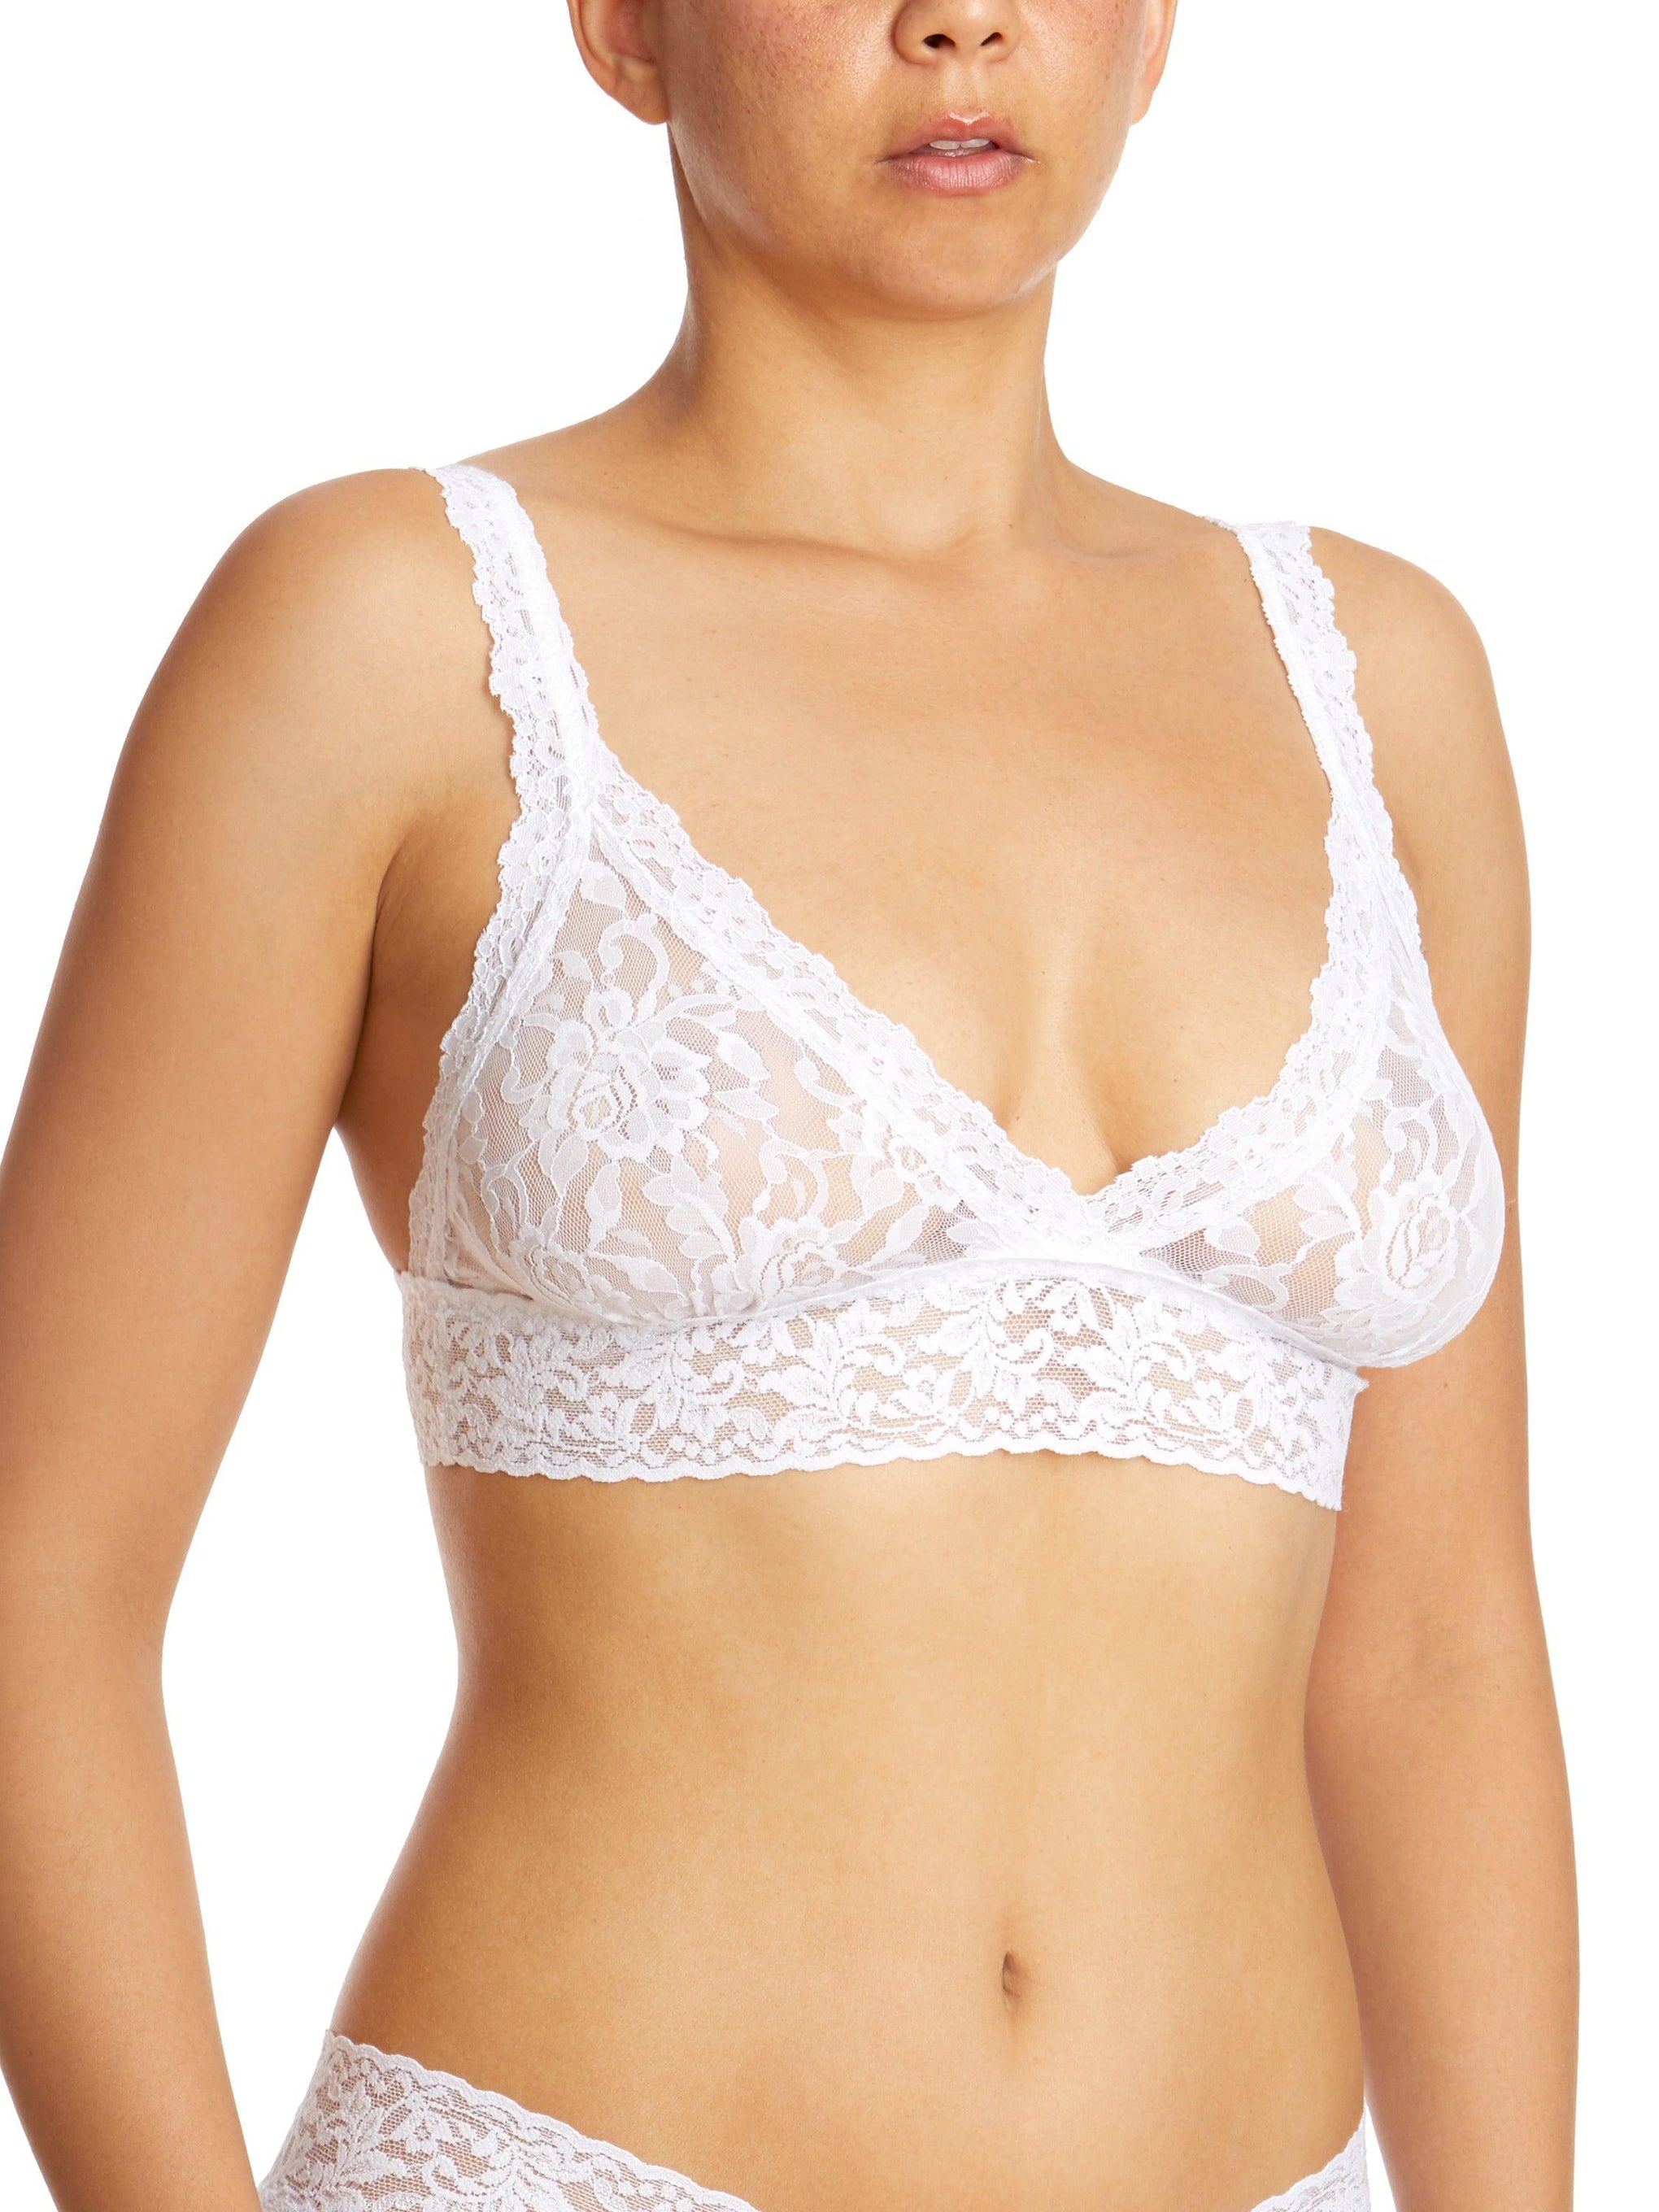 BE CHICK - White bra Satin BeChick ❤ - BeChick - Lace - Lingerie - Bralettes,  Lingerie